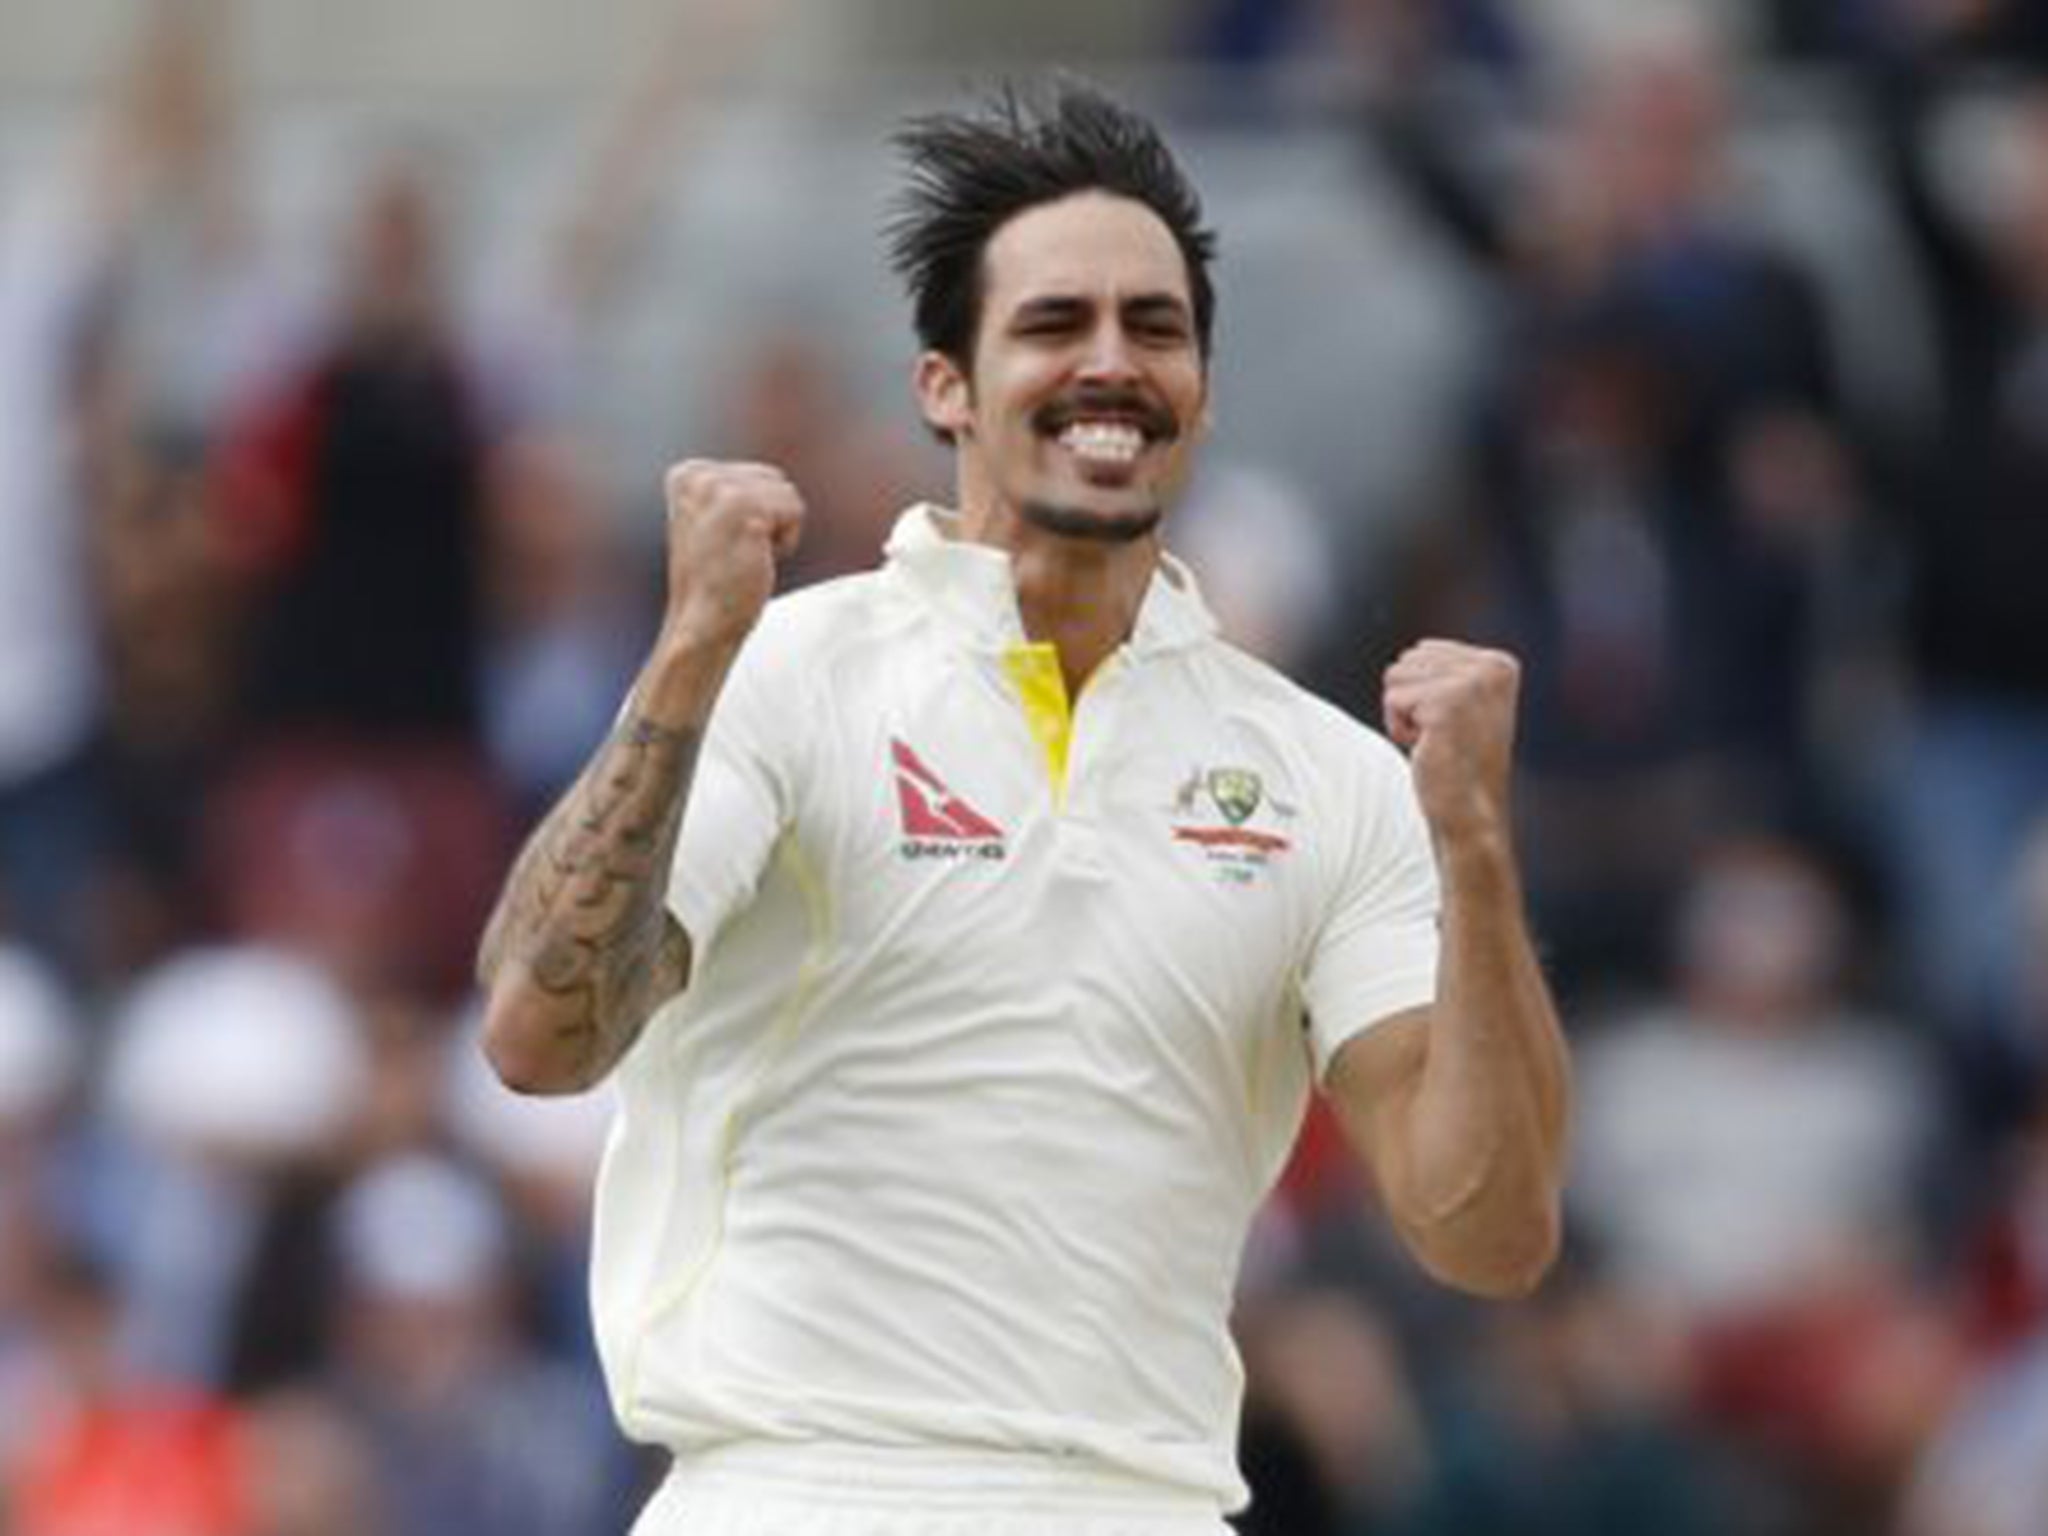 Mitchell Johnson is Australia’s “Iron Man” who has joined an elite band with 300 Test wickets